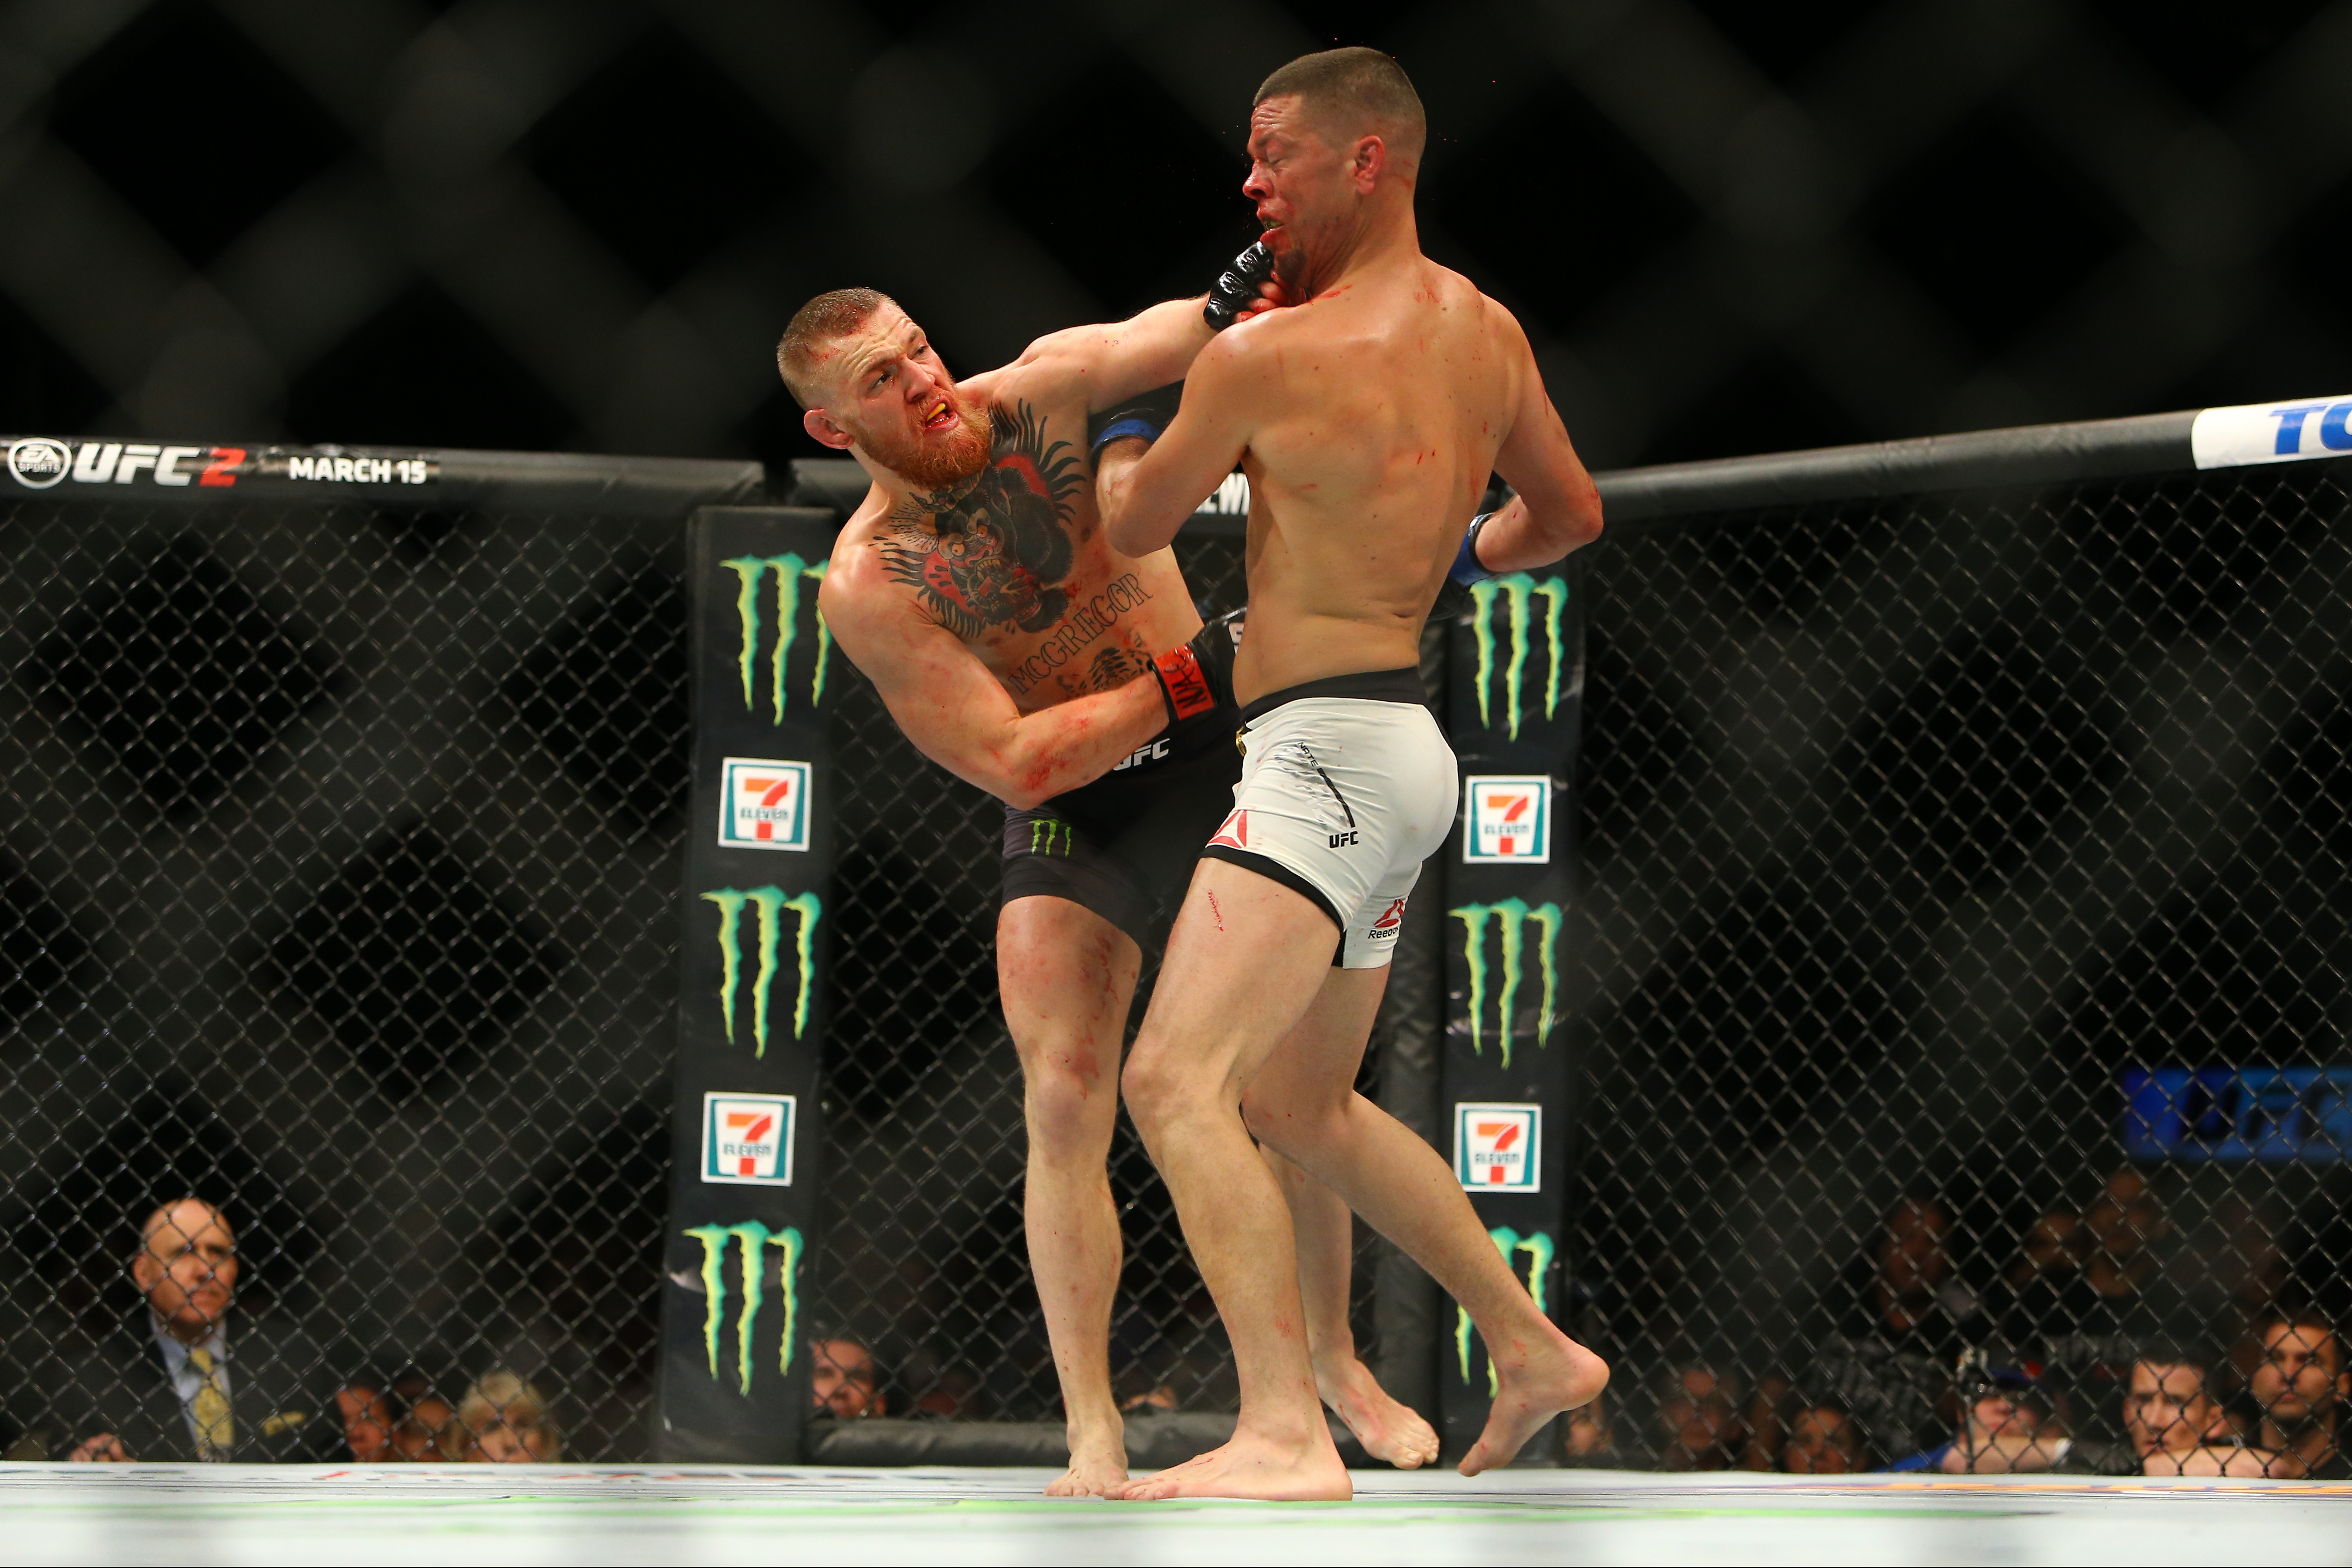 Conor McGregor punches Nate Diaz during UFC 196 at the MGM Grand Garden Arena on March 5, 2016 in Las Vegas, Nevada. (Getty)